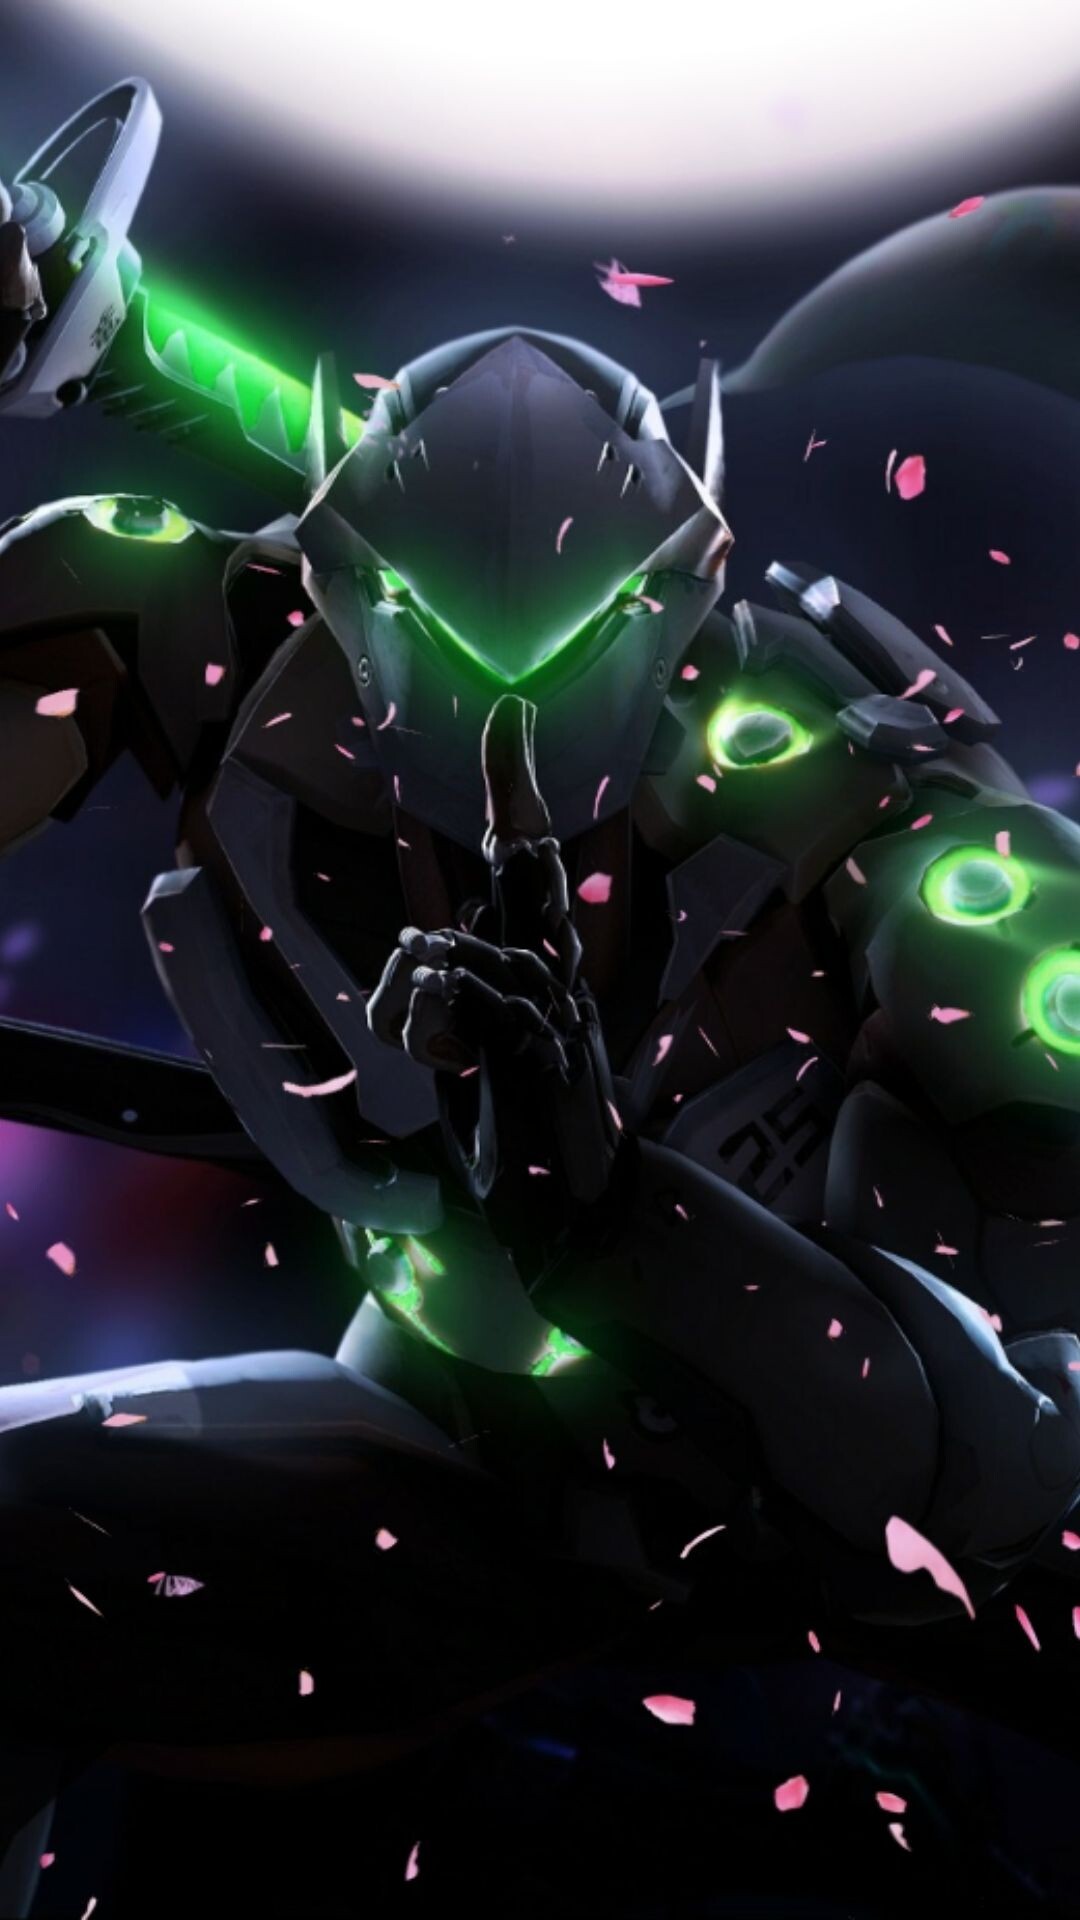 Genji: Overwatch, A deadly offensive threat, harassing his opponents with constant volleys of Shurikens. 1080x1920 Full HD Wallpaper.